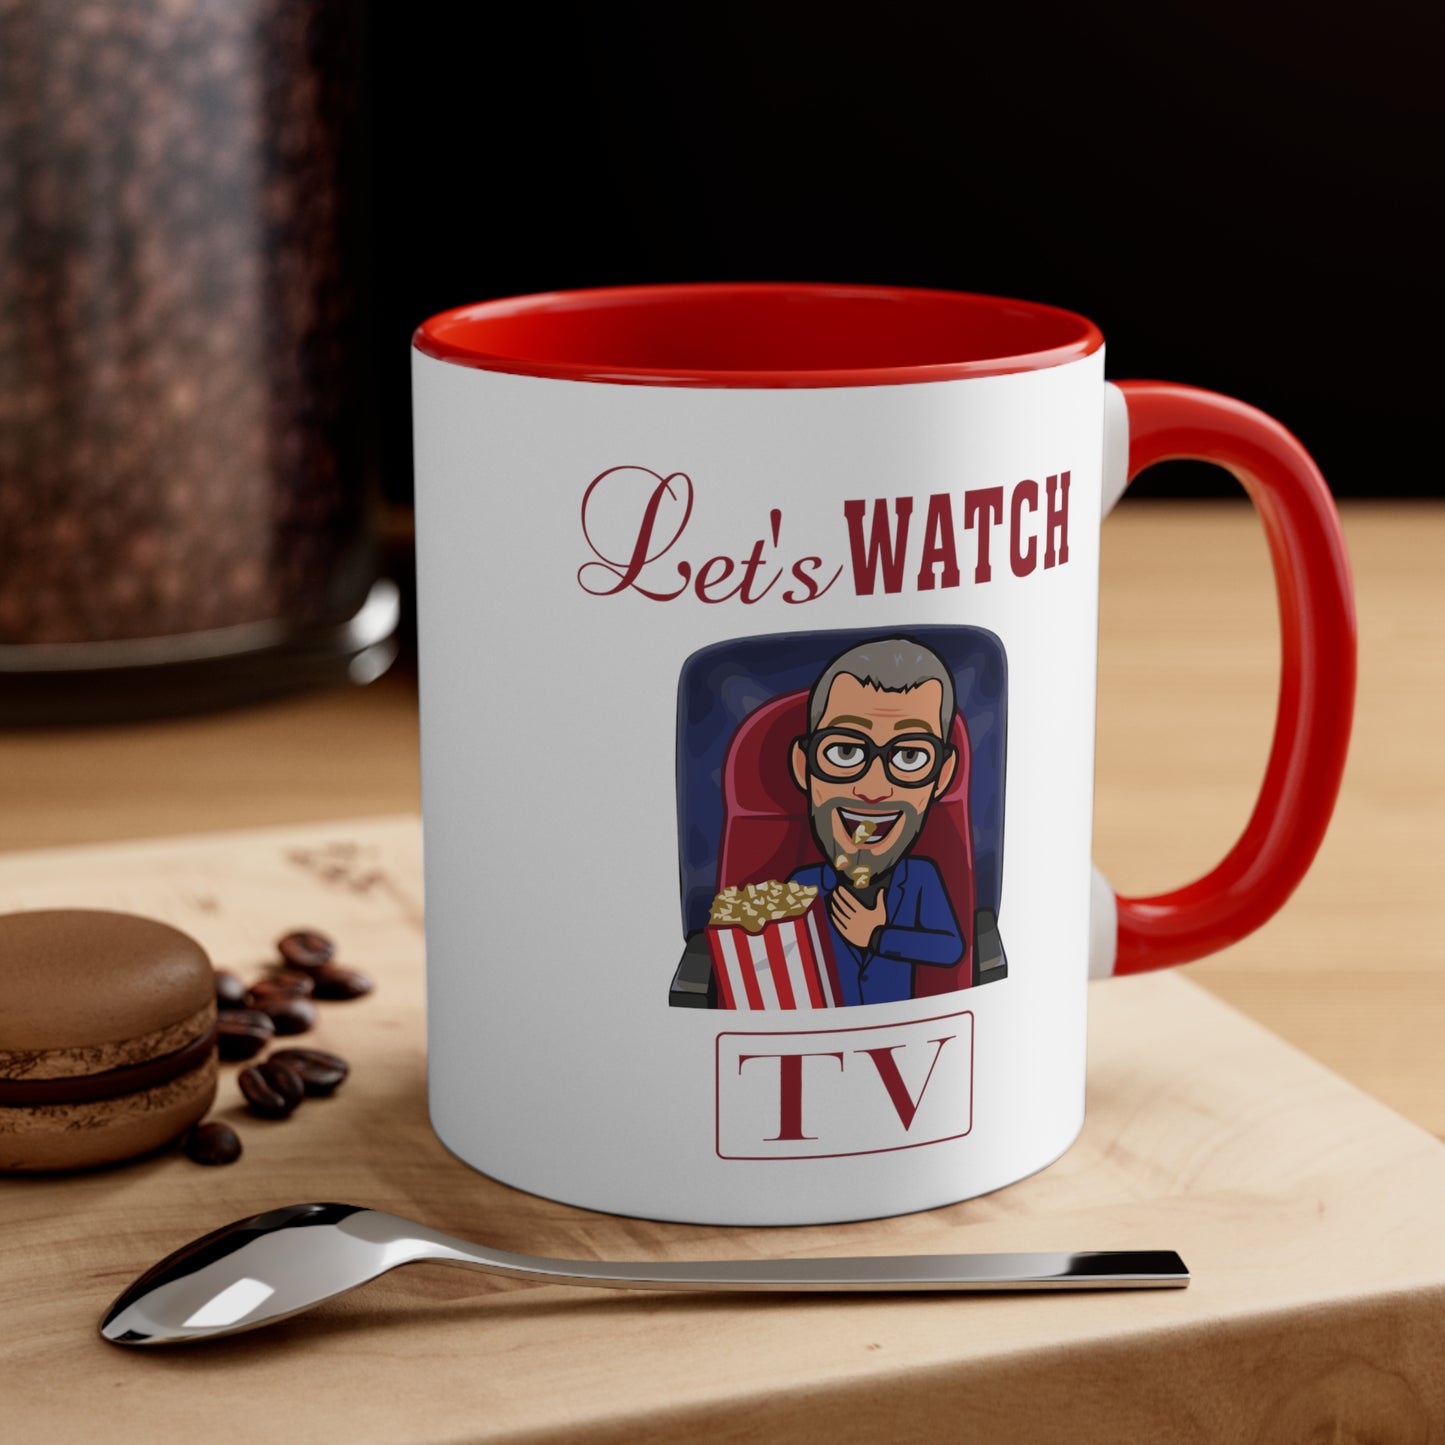 Jay Watch Let's Watch TV - Accent Coffee Mug, 11oz